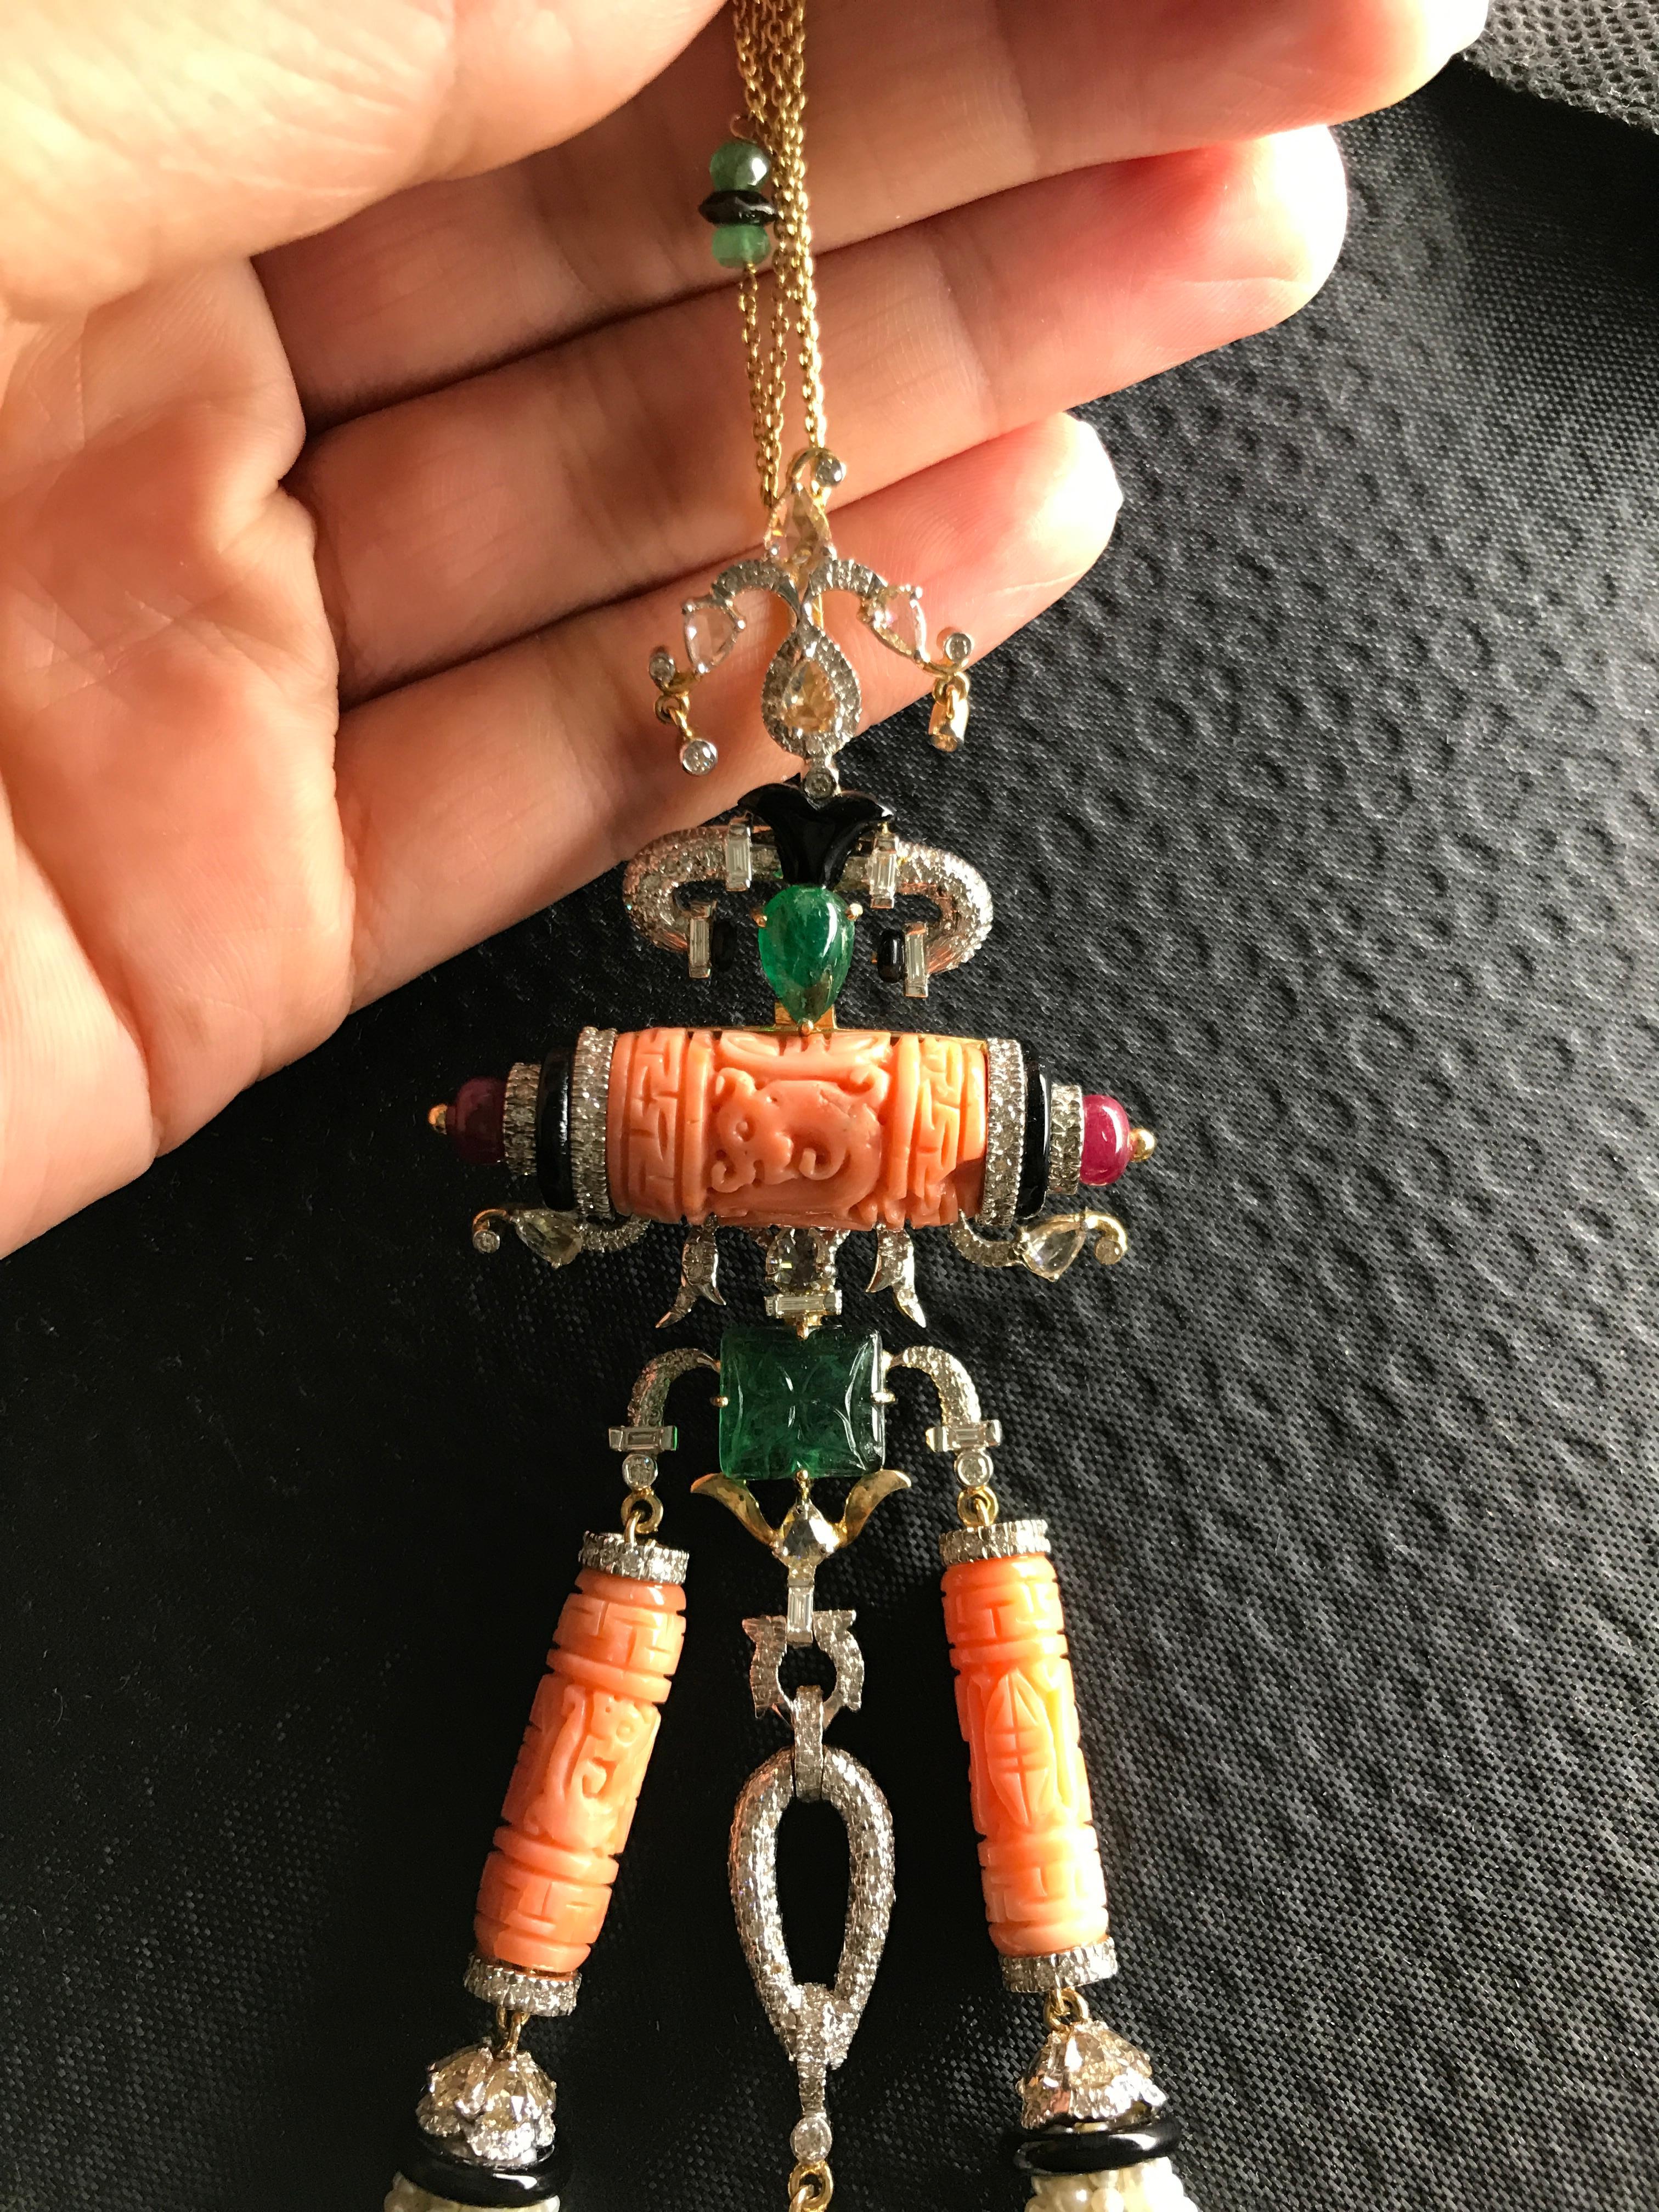 An art-deco looking, gorgeous Italian Coral and South Sea Pearl tassle necklace, with Zambian Emerald and Ruby and Diamonds. This tassle is 6.5inches long, and the chain (with emeralds) is 24inches long.

Details:
Coral: 37.01 Ct
Emerald: 8.15